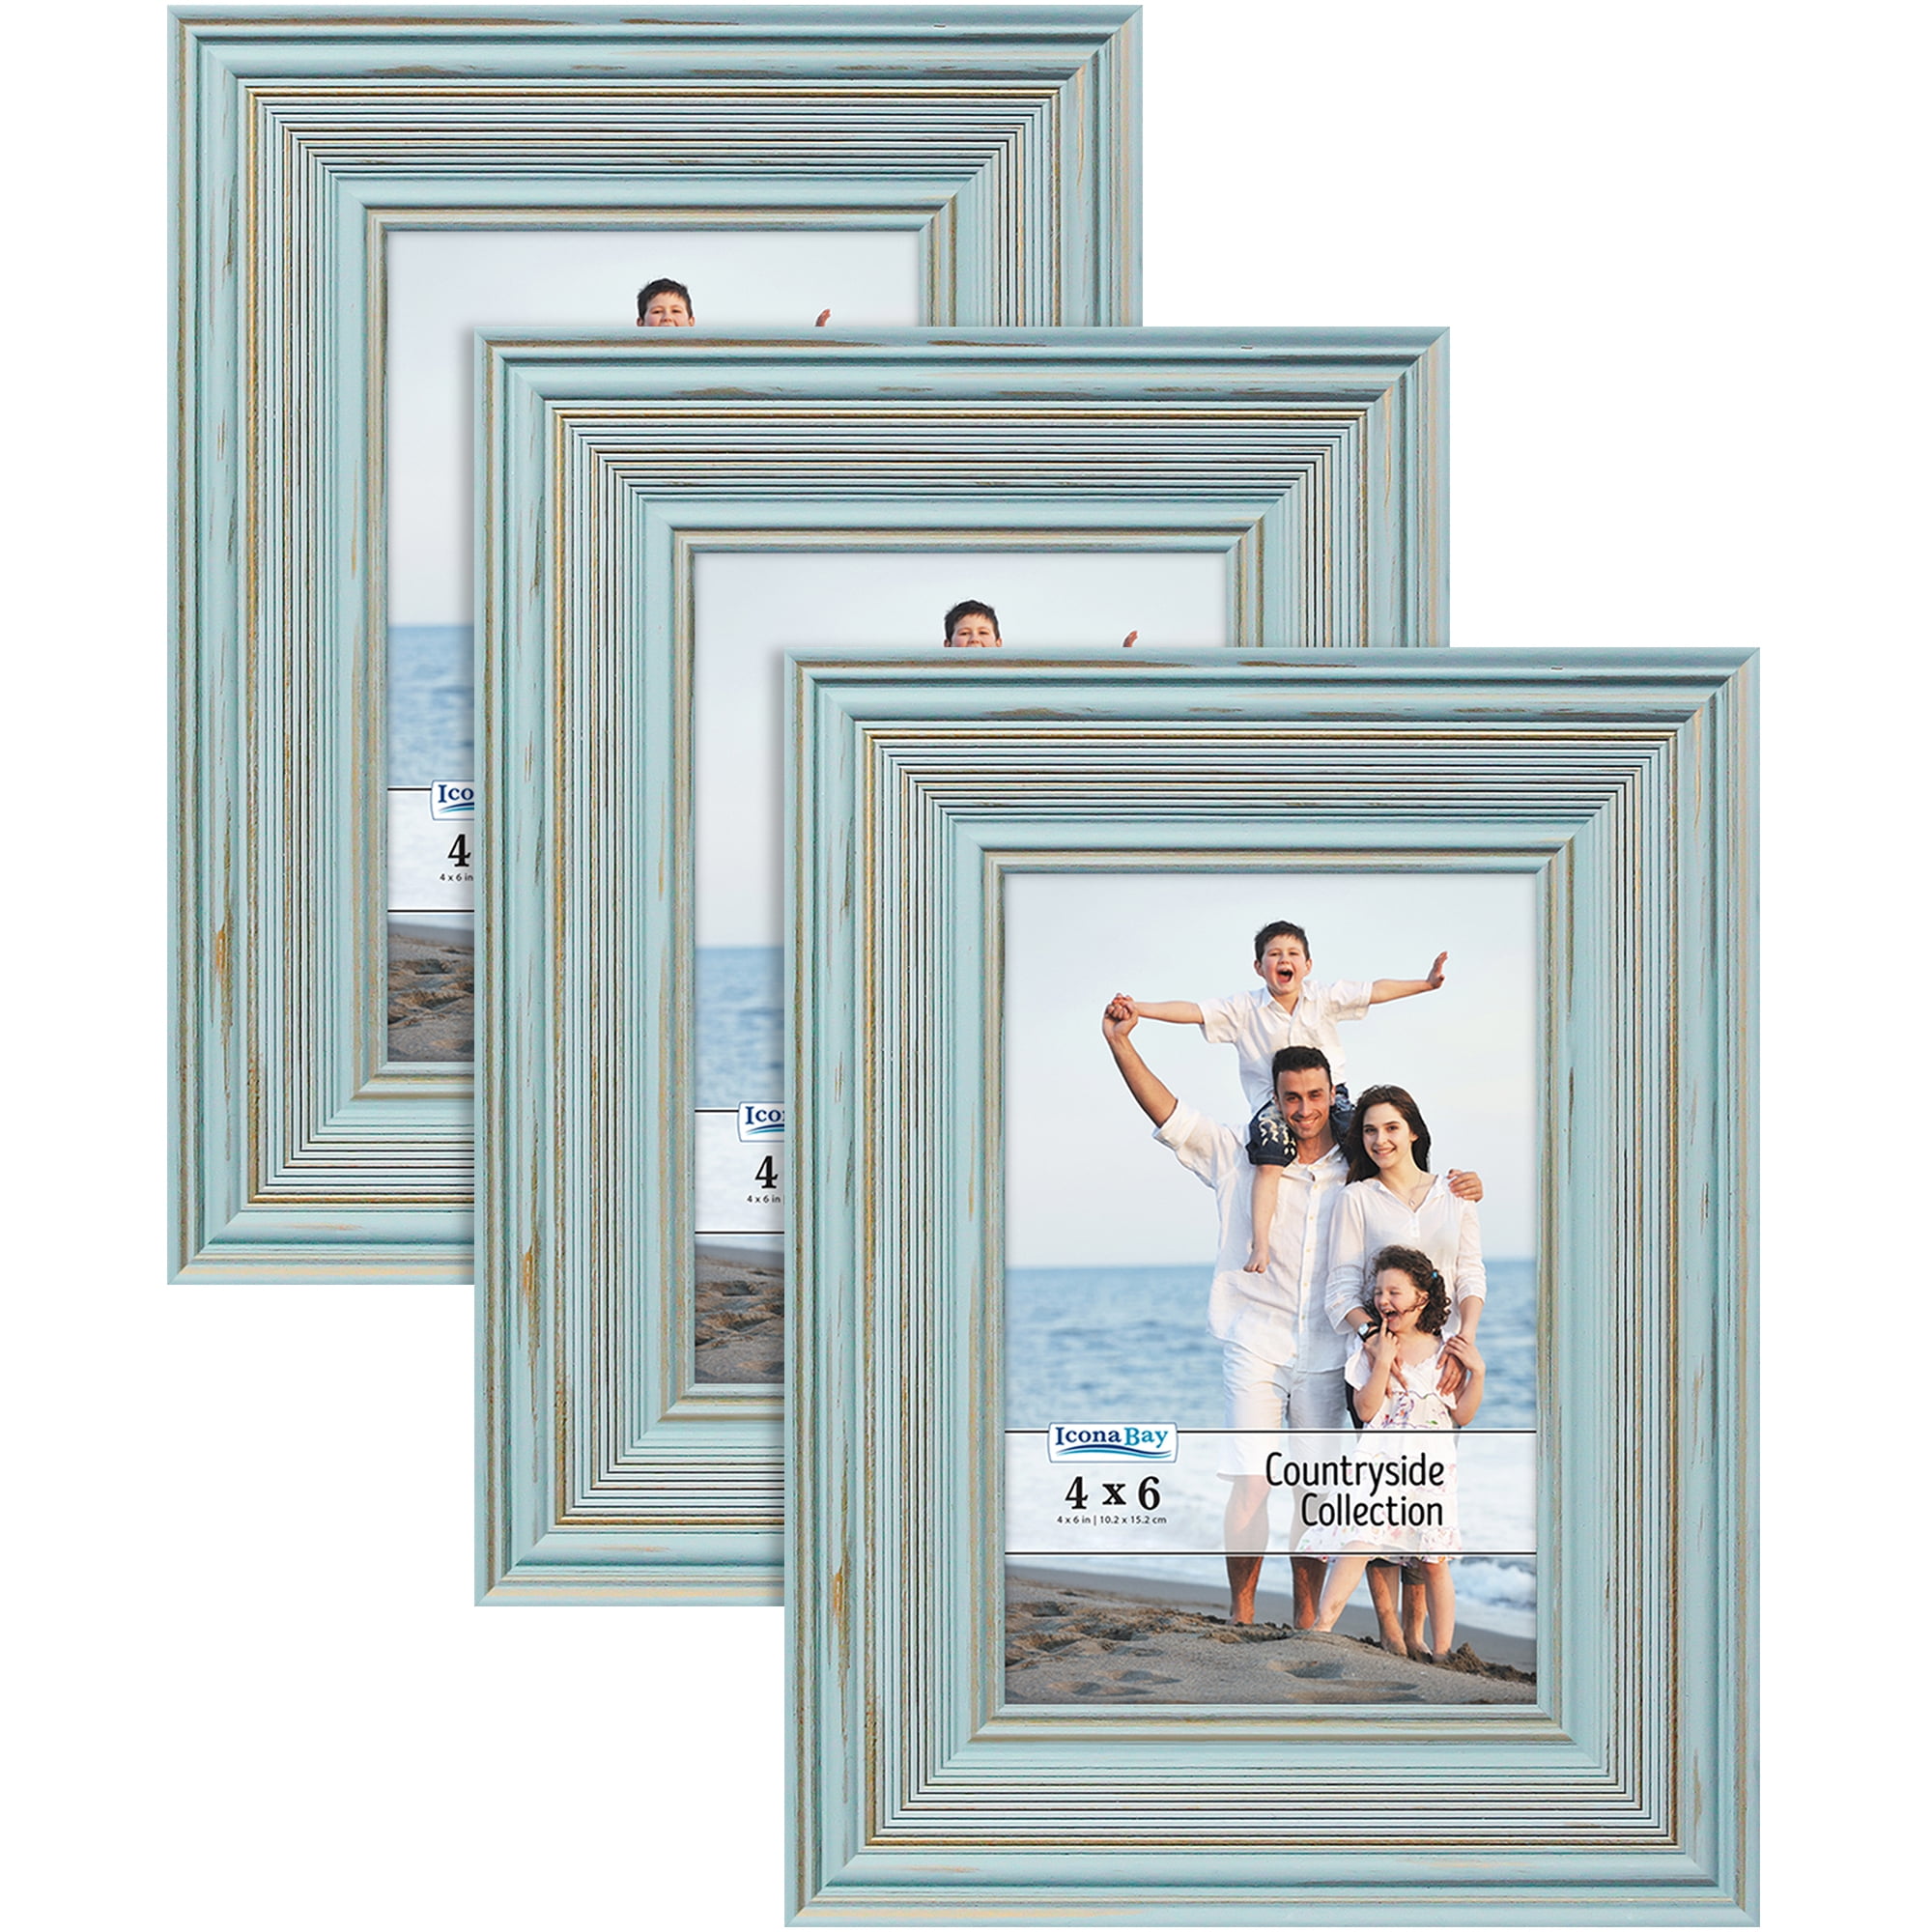 Cherished Memories Collection Traditional Style Composite Wood Frame for Walls or Tables Picture Frame Heritage Gray Wood Finish, 6 Pack 10x15 cm Icona Bay 4x6